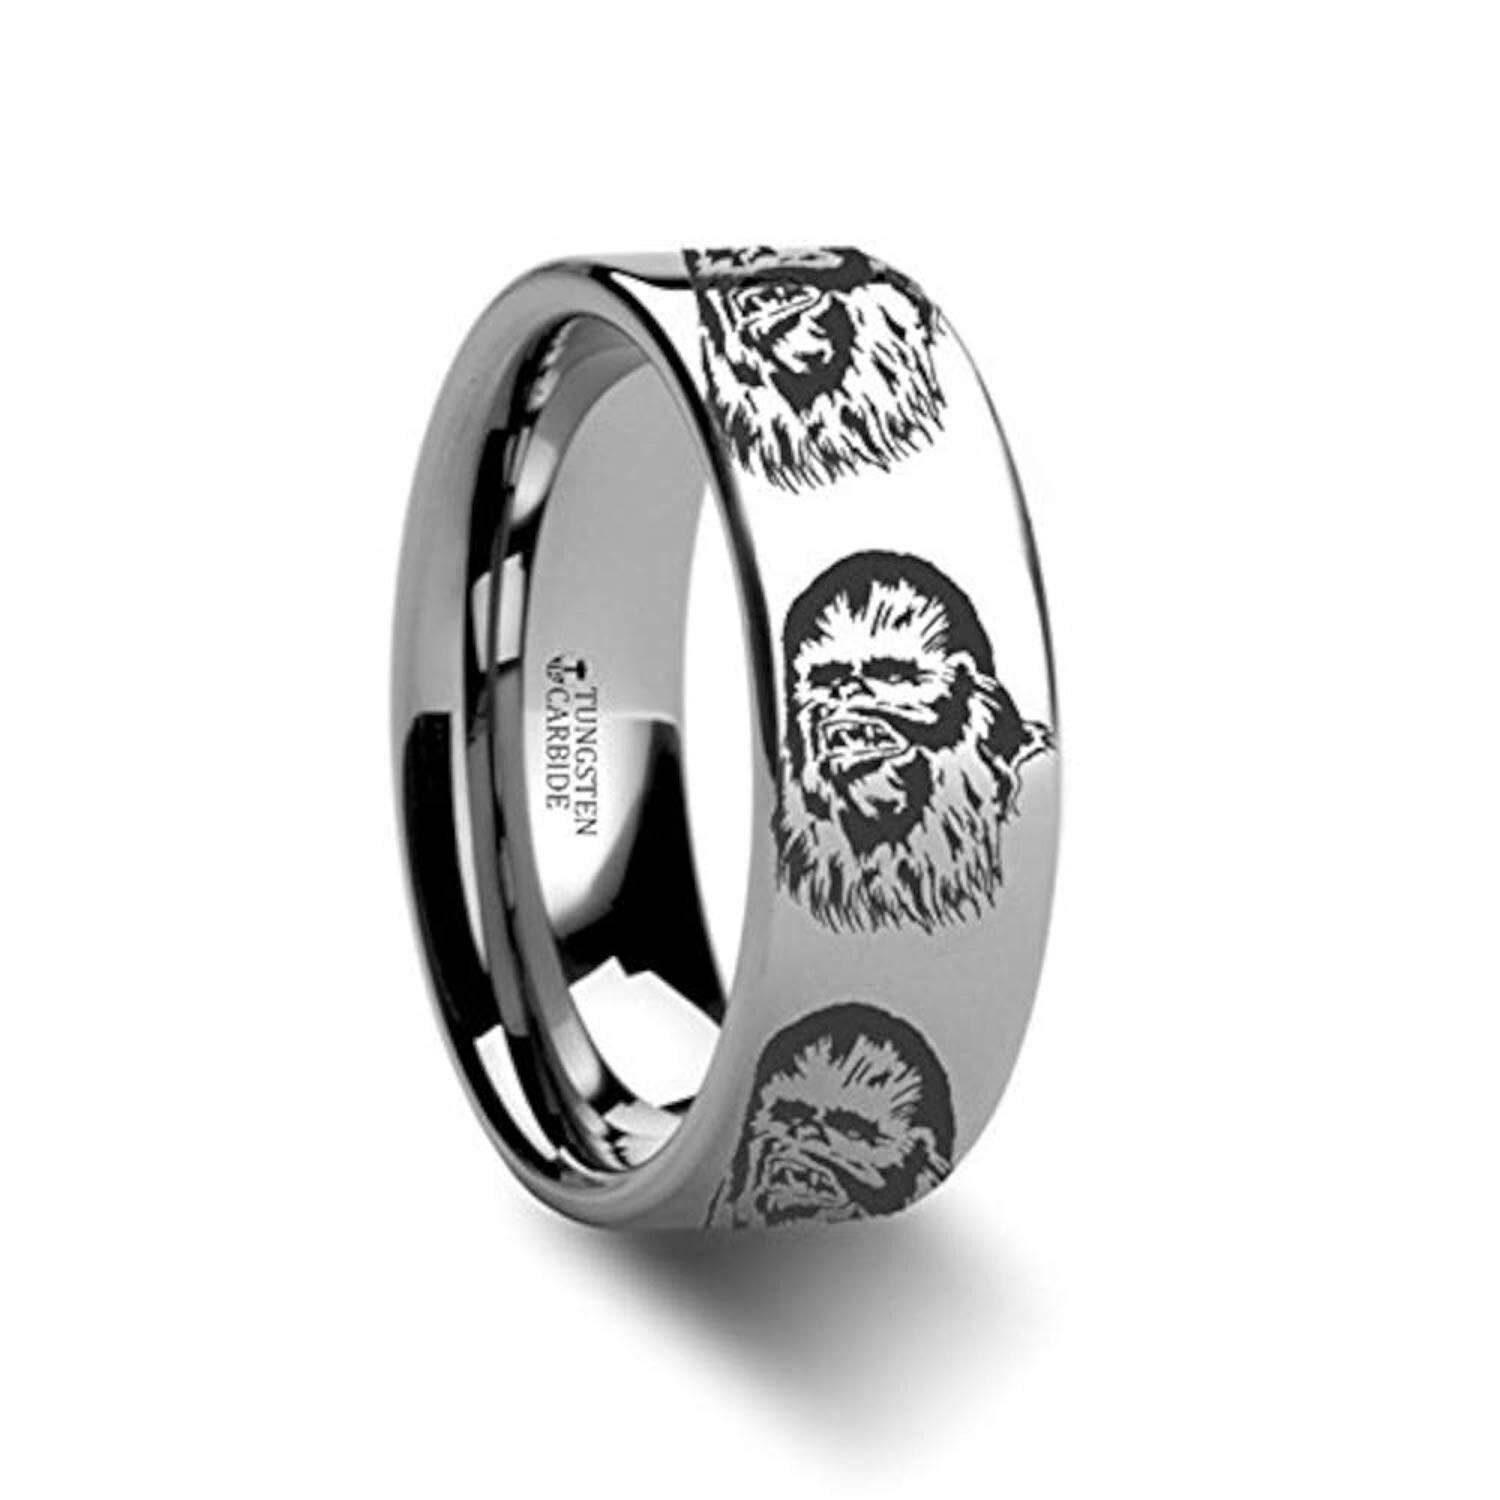 MEN'S STAINLESS STEEL CABLE RING IN BLACK ENGRAVABLE WOLF WEDDING BANDband